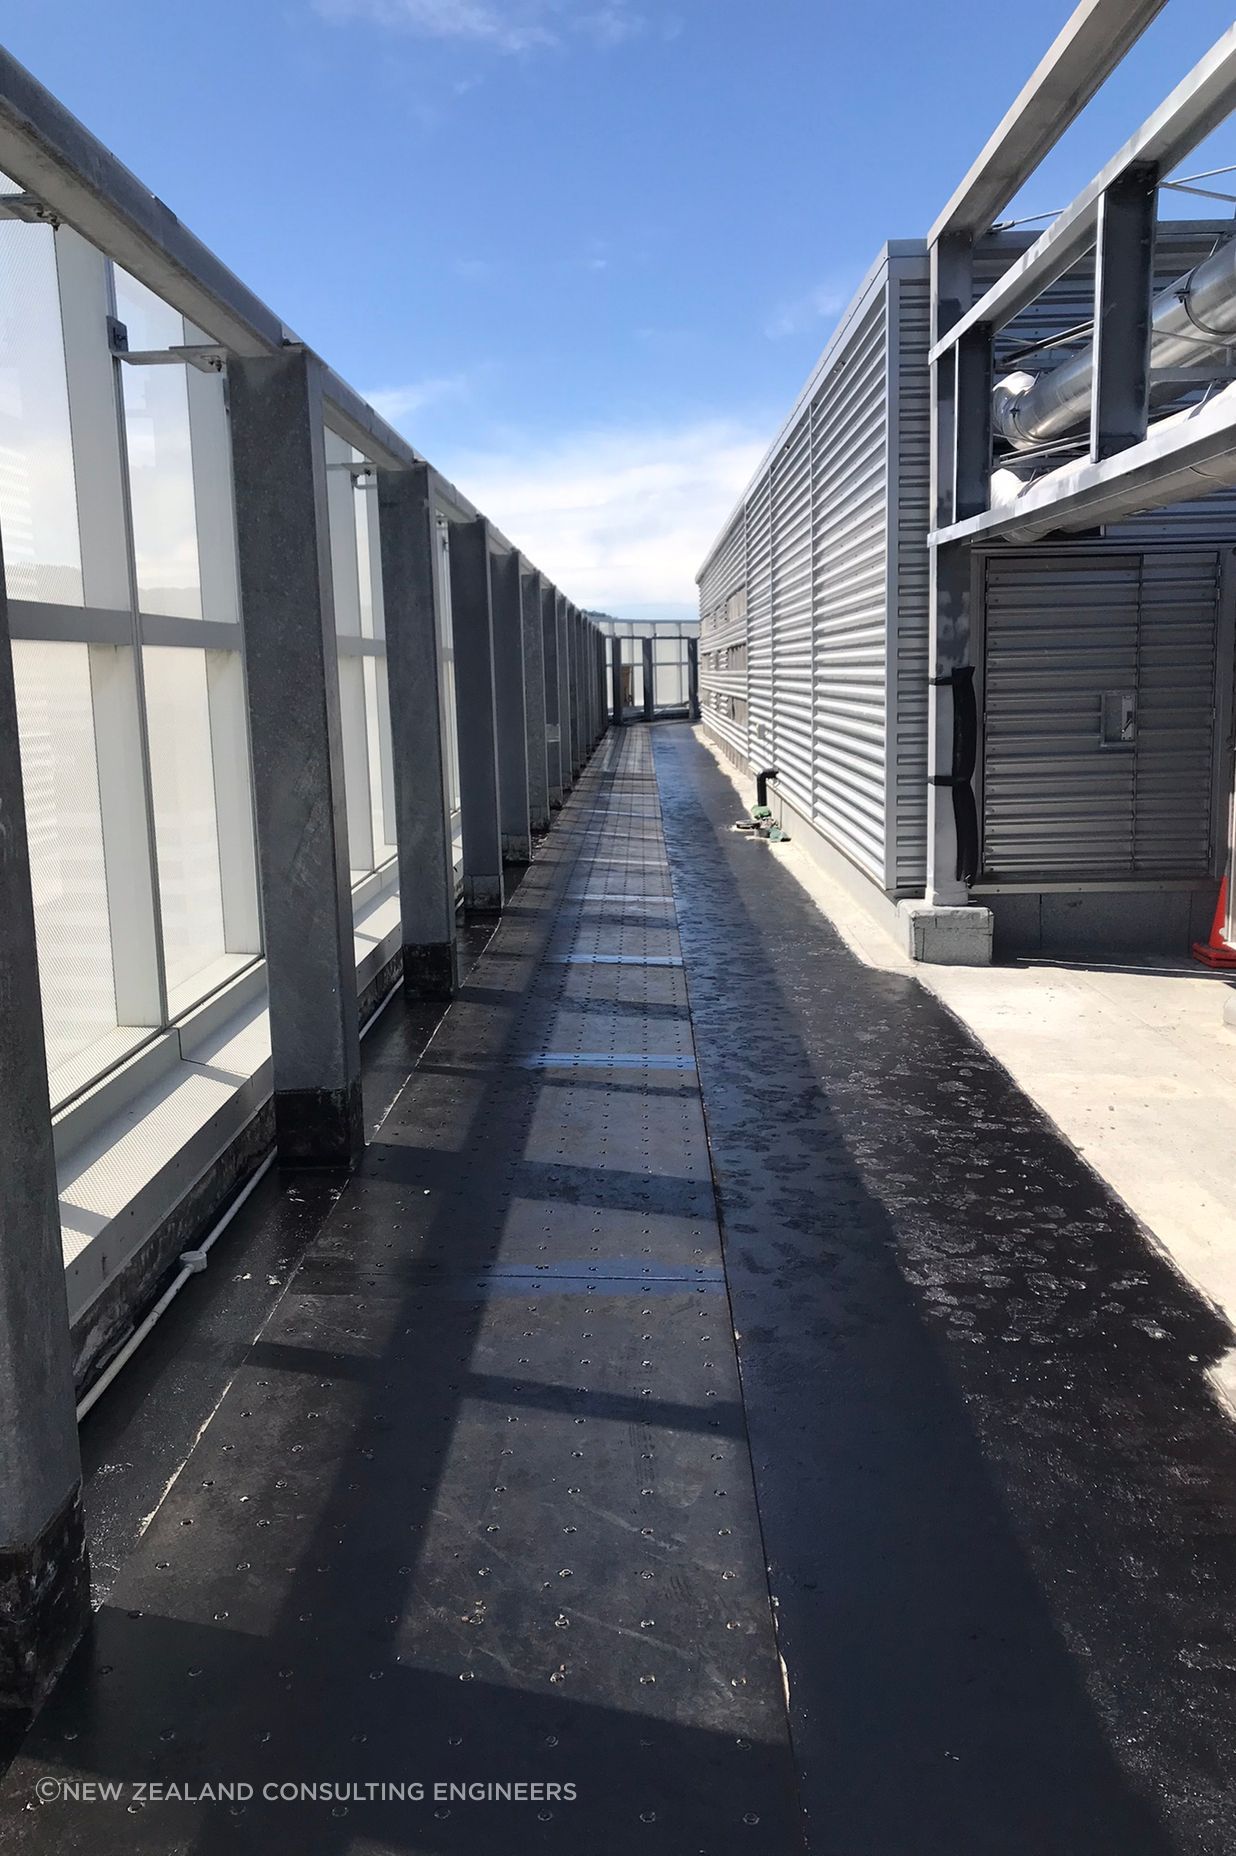 "At the roof level the steel plates had to increase to 12mm and 16mm thickness, with a large 1500mm deep and 850mm wide concrete collar installed around the core of the building to allow for the diaphragm forces to be transferred into the core."